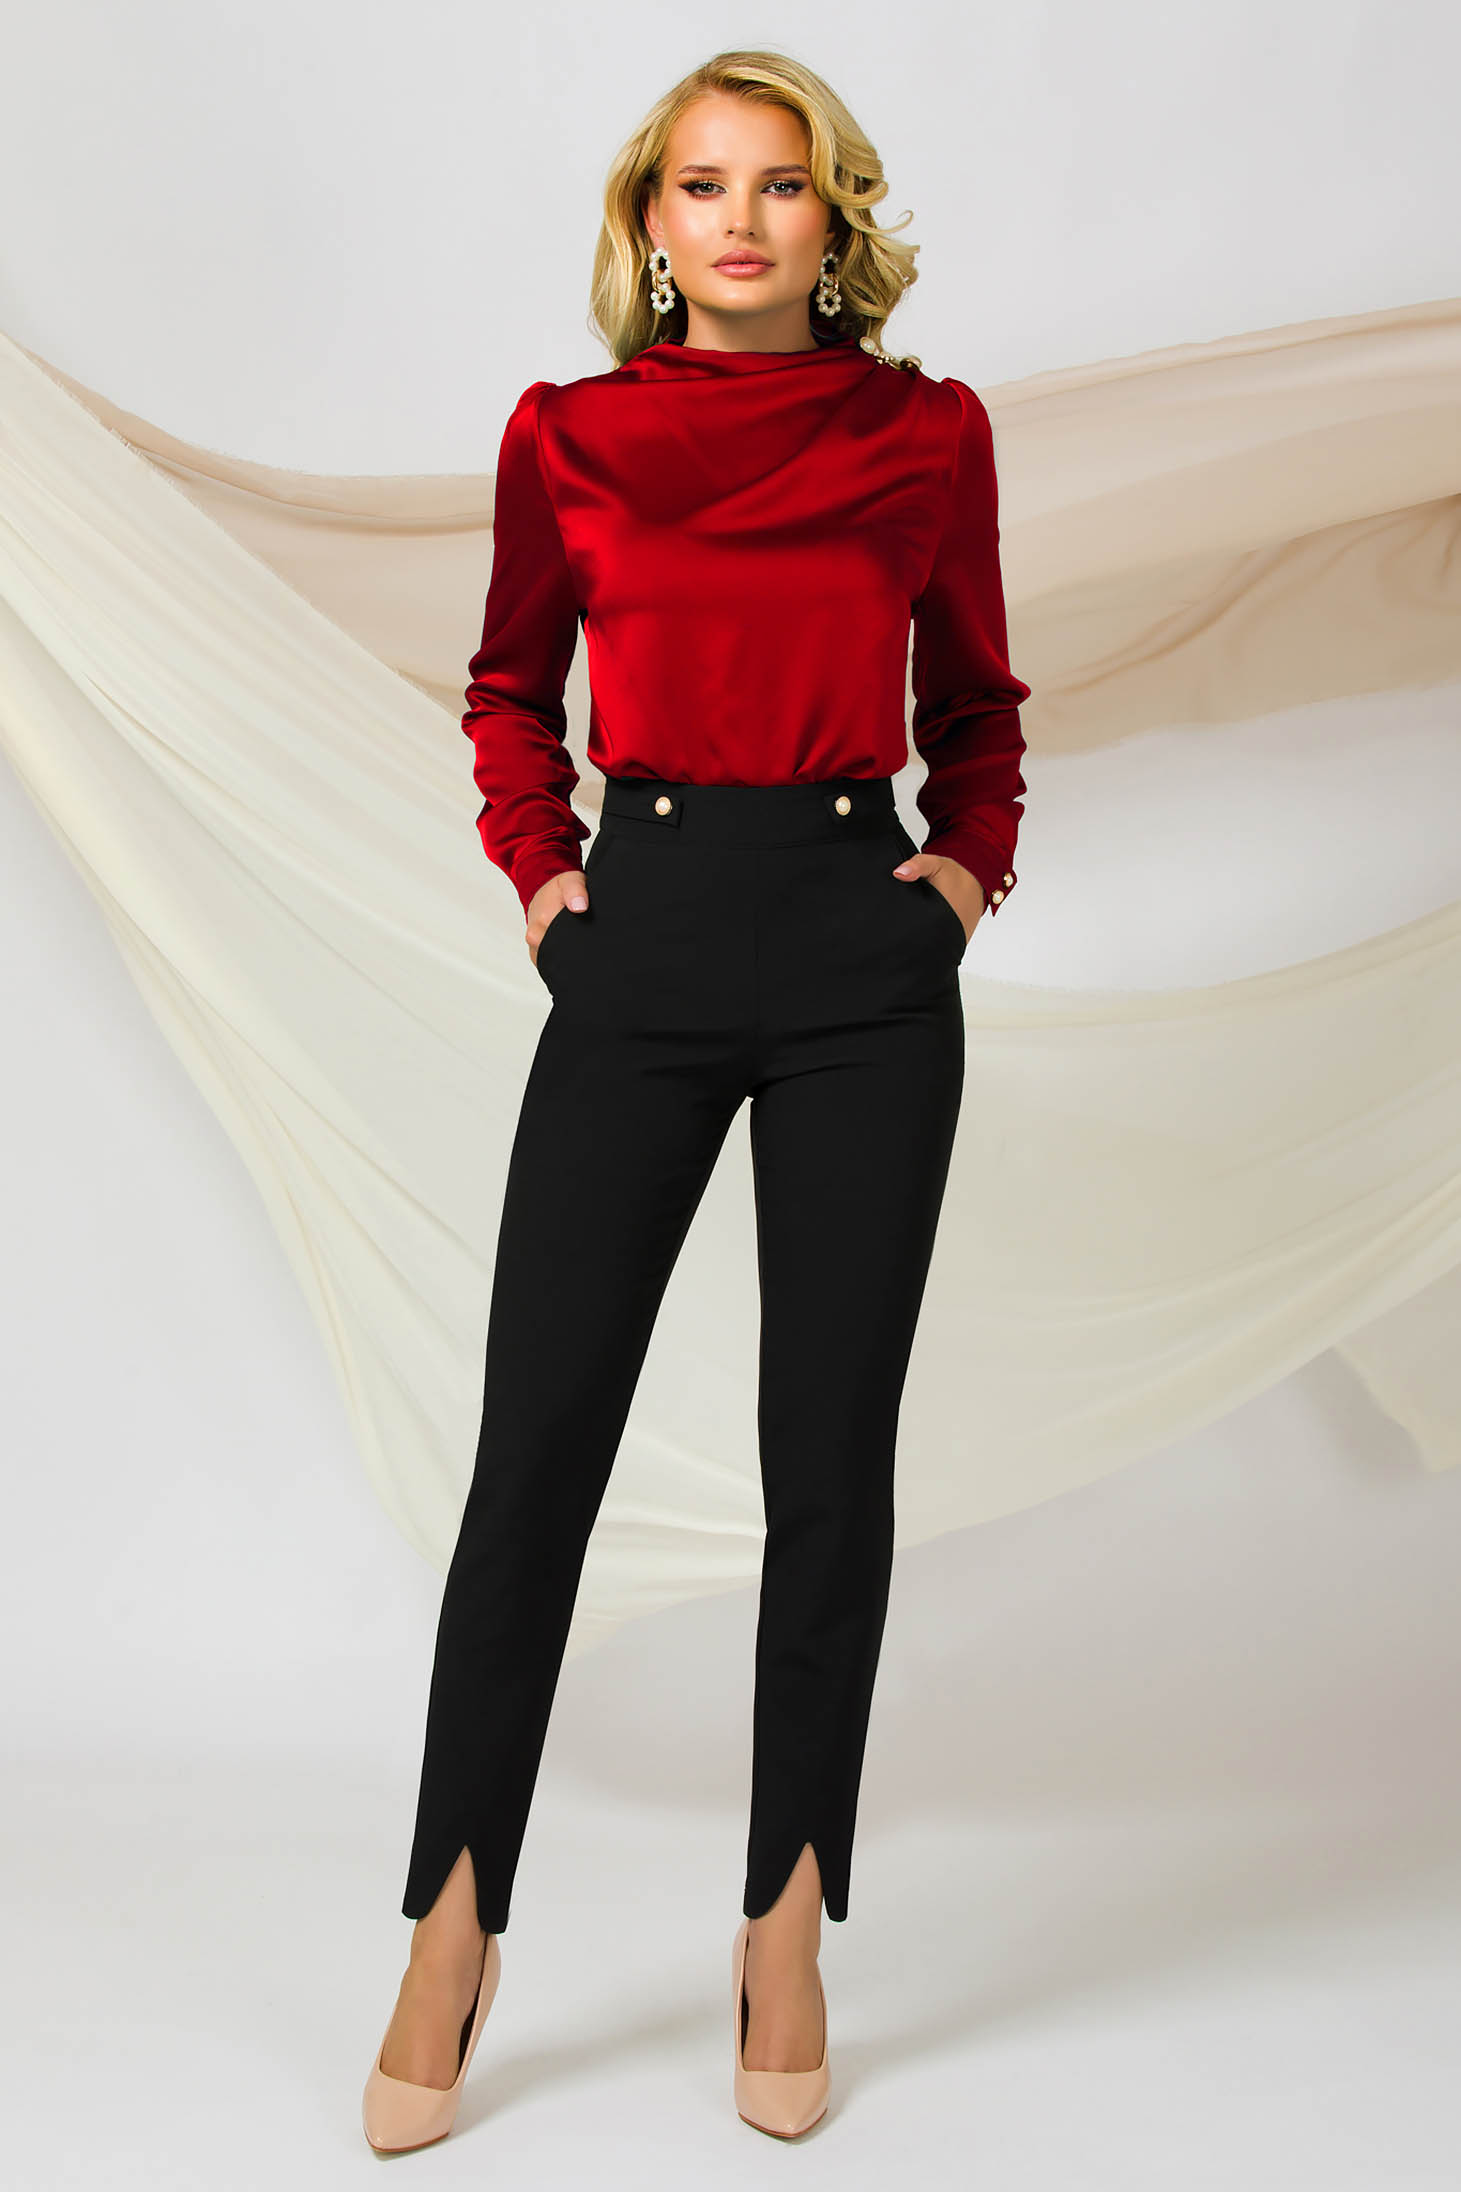 Black trousers conical high waisted pearls